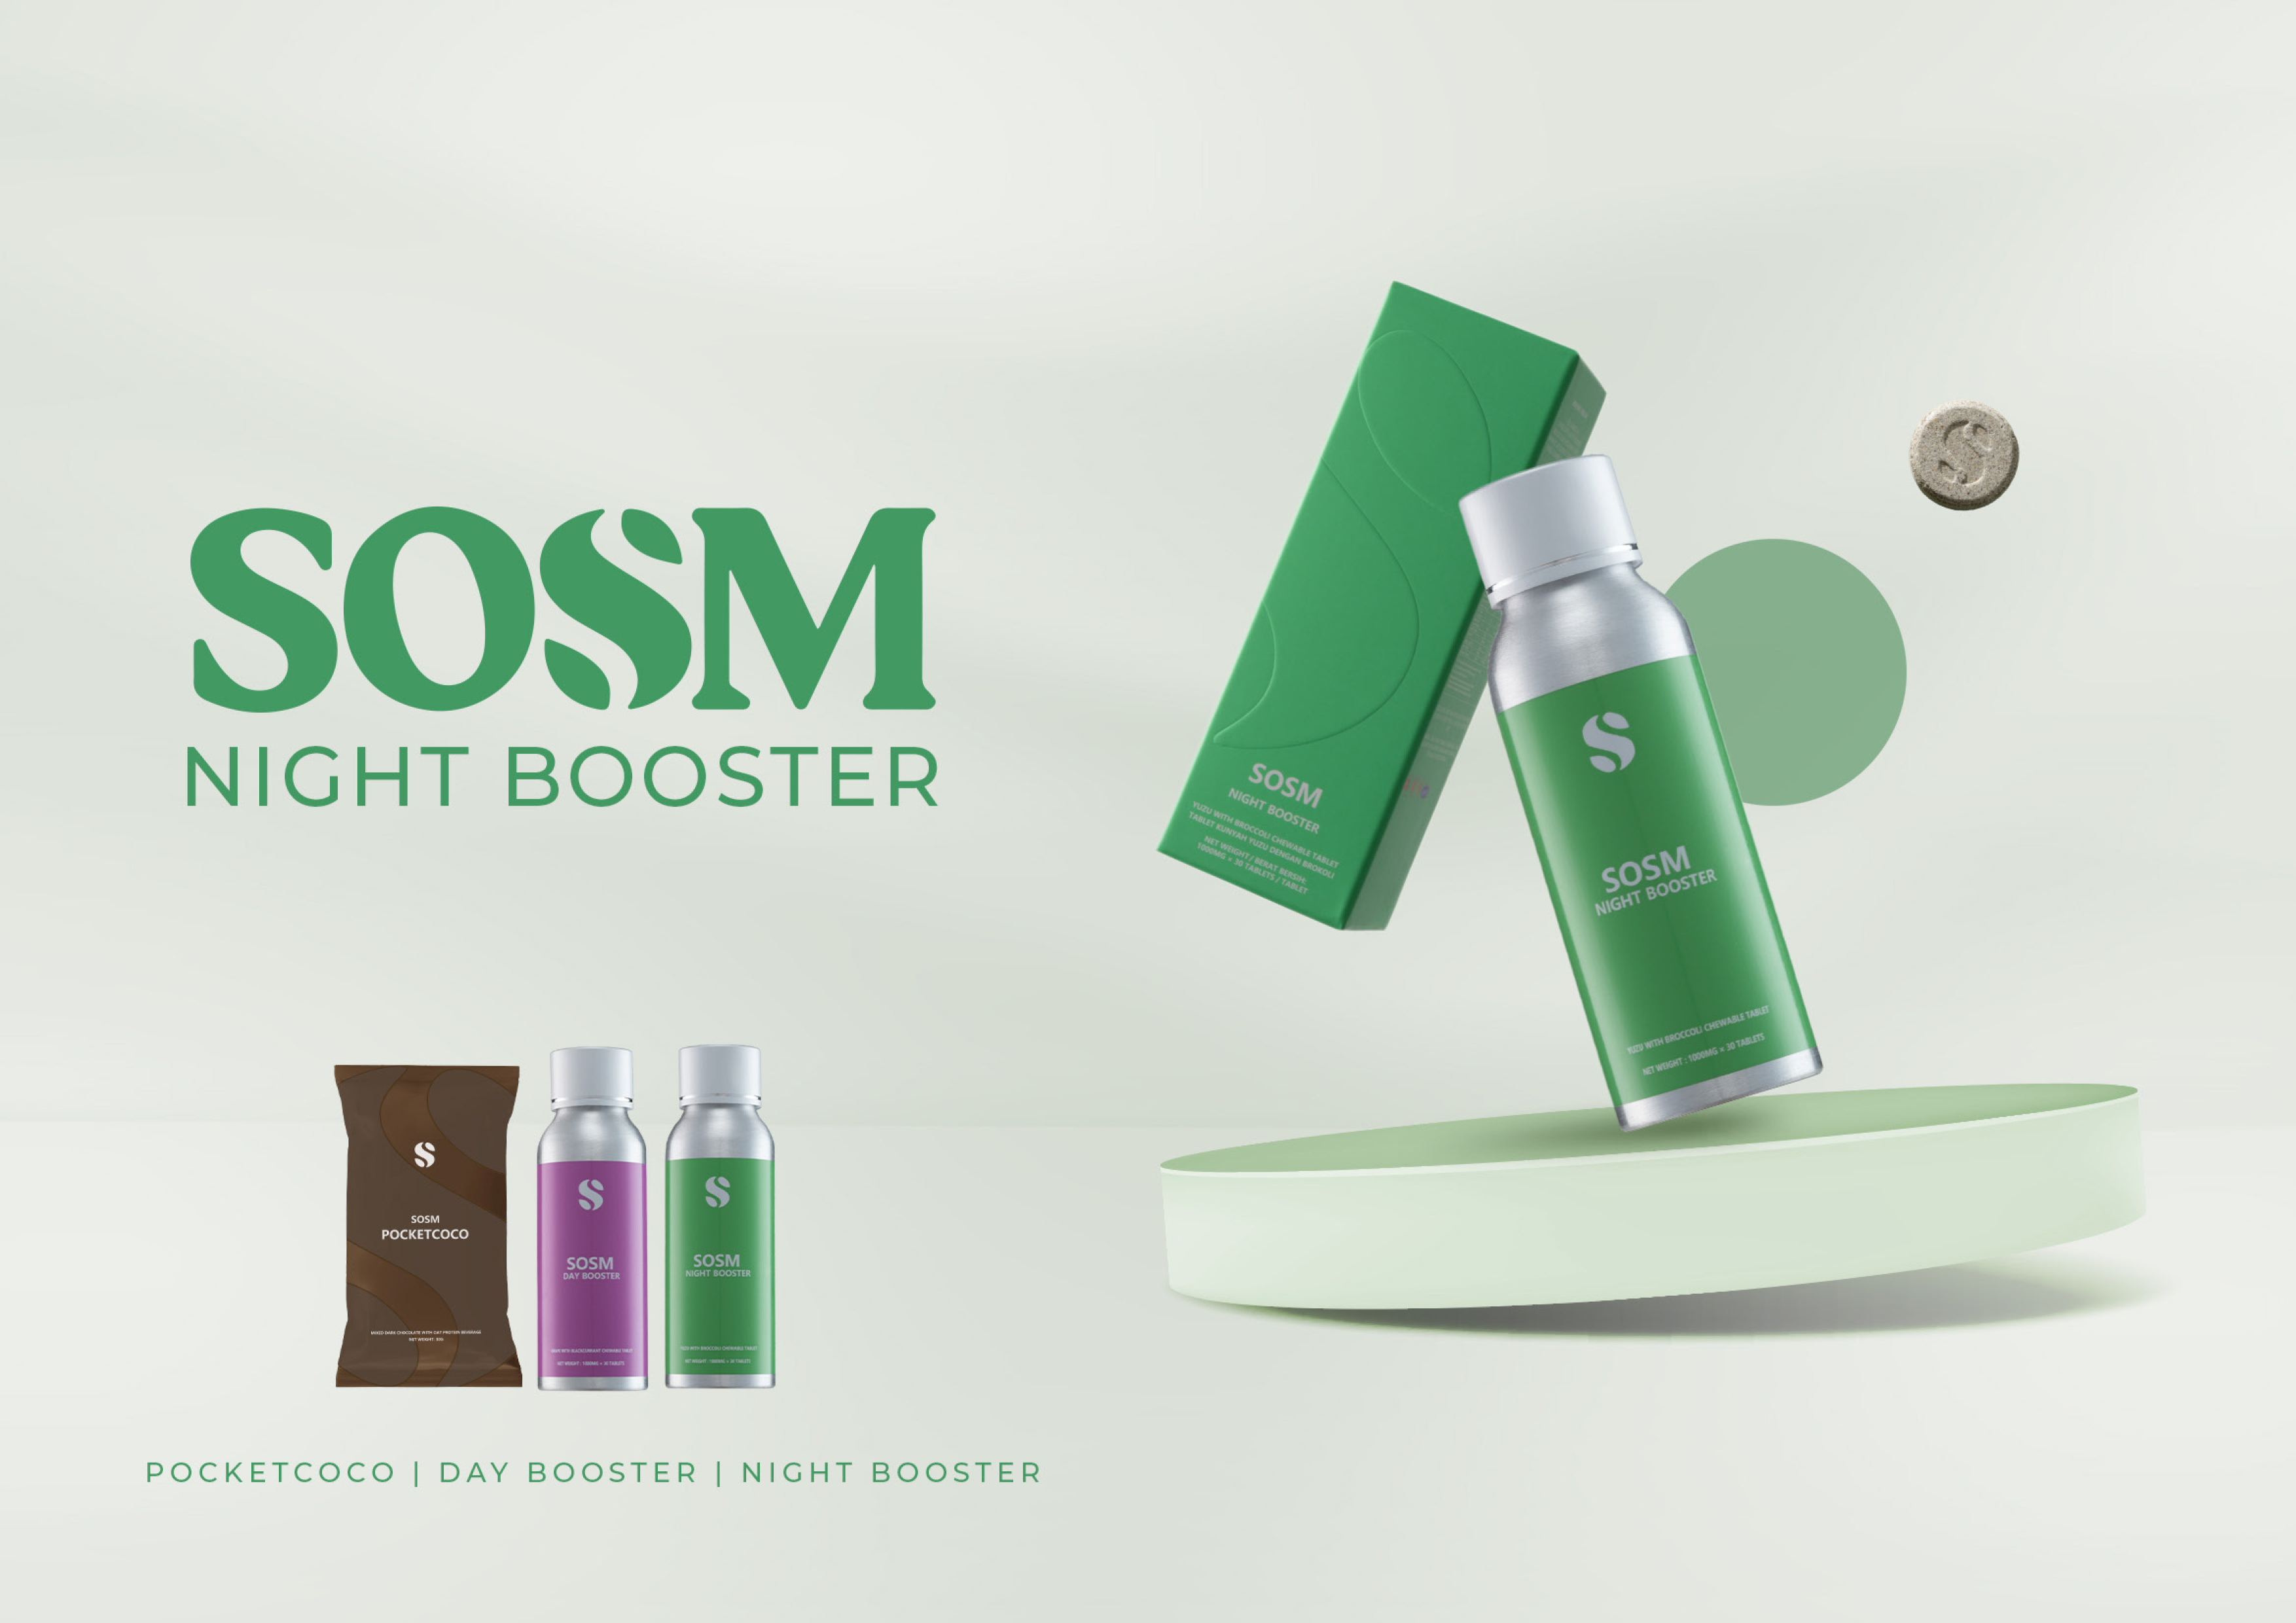 SOSM Night Booster - Overview